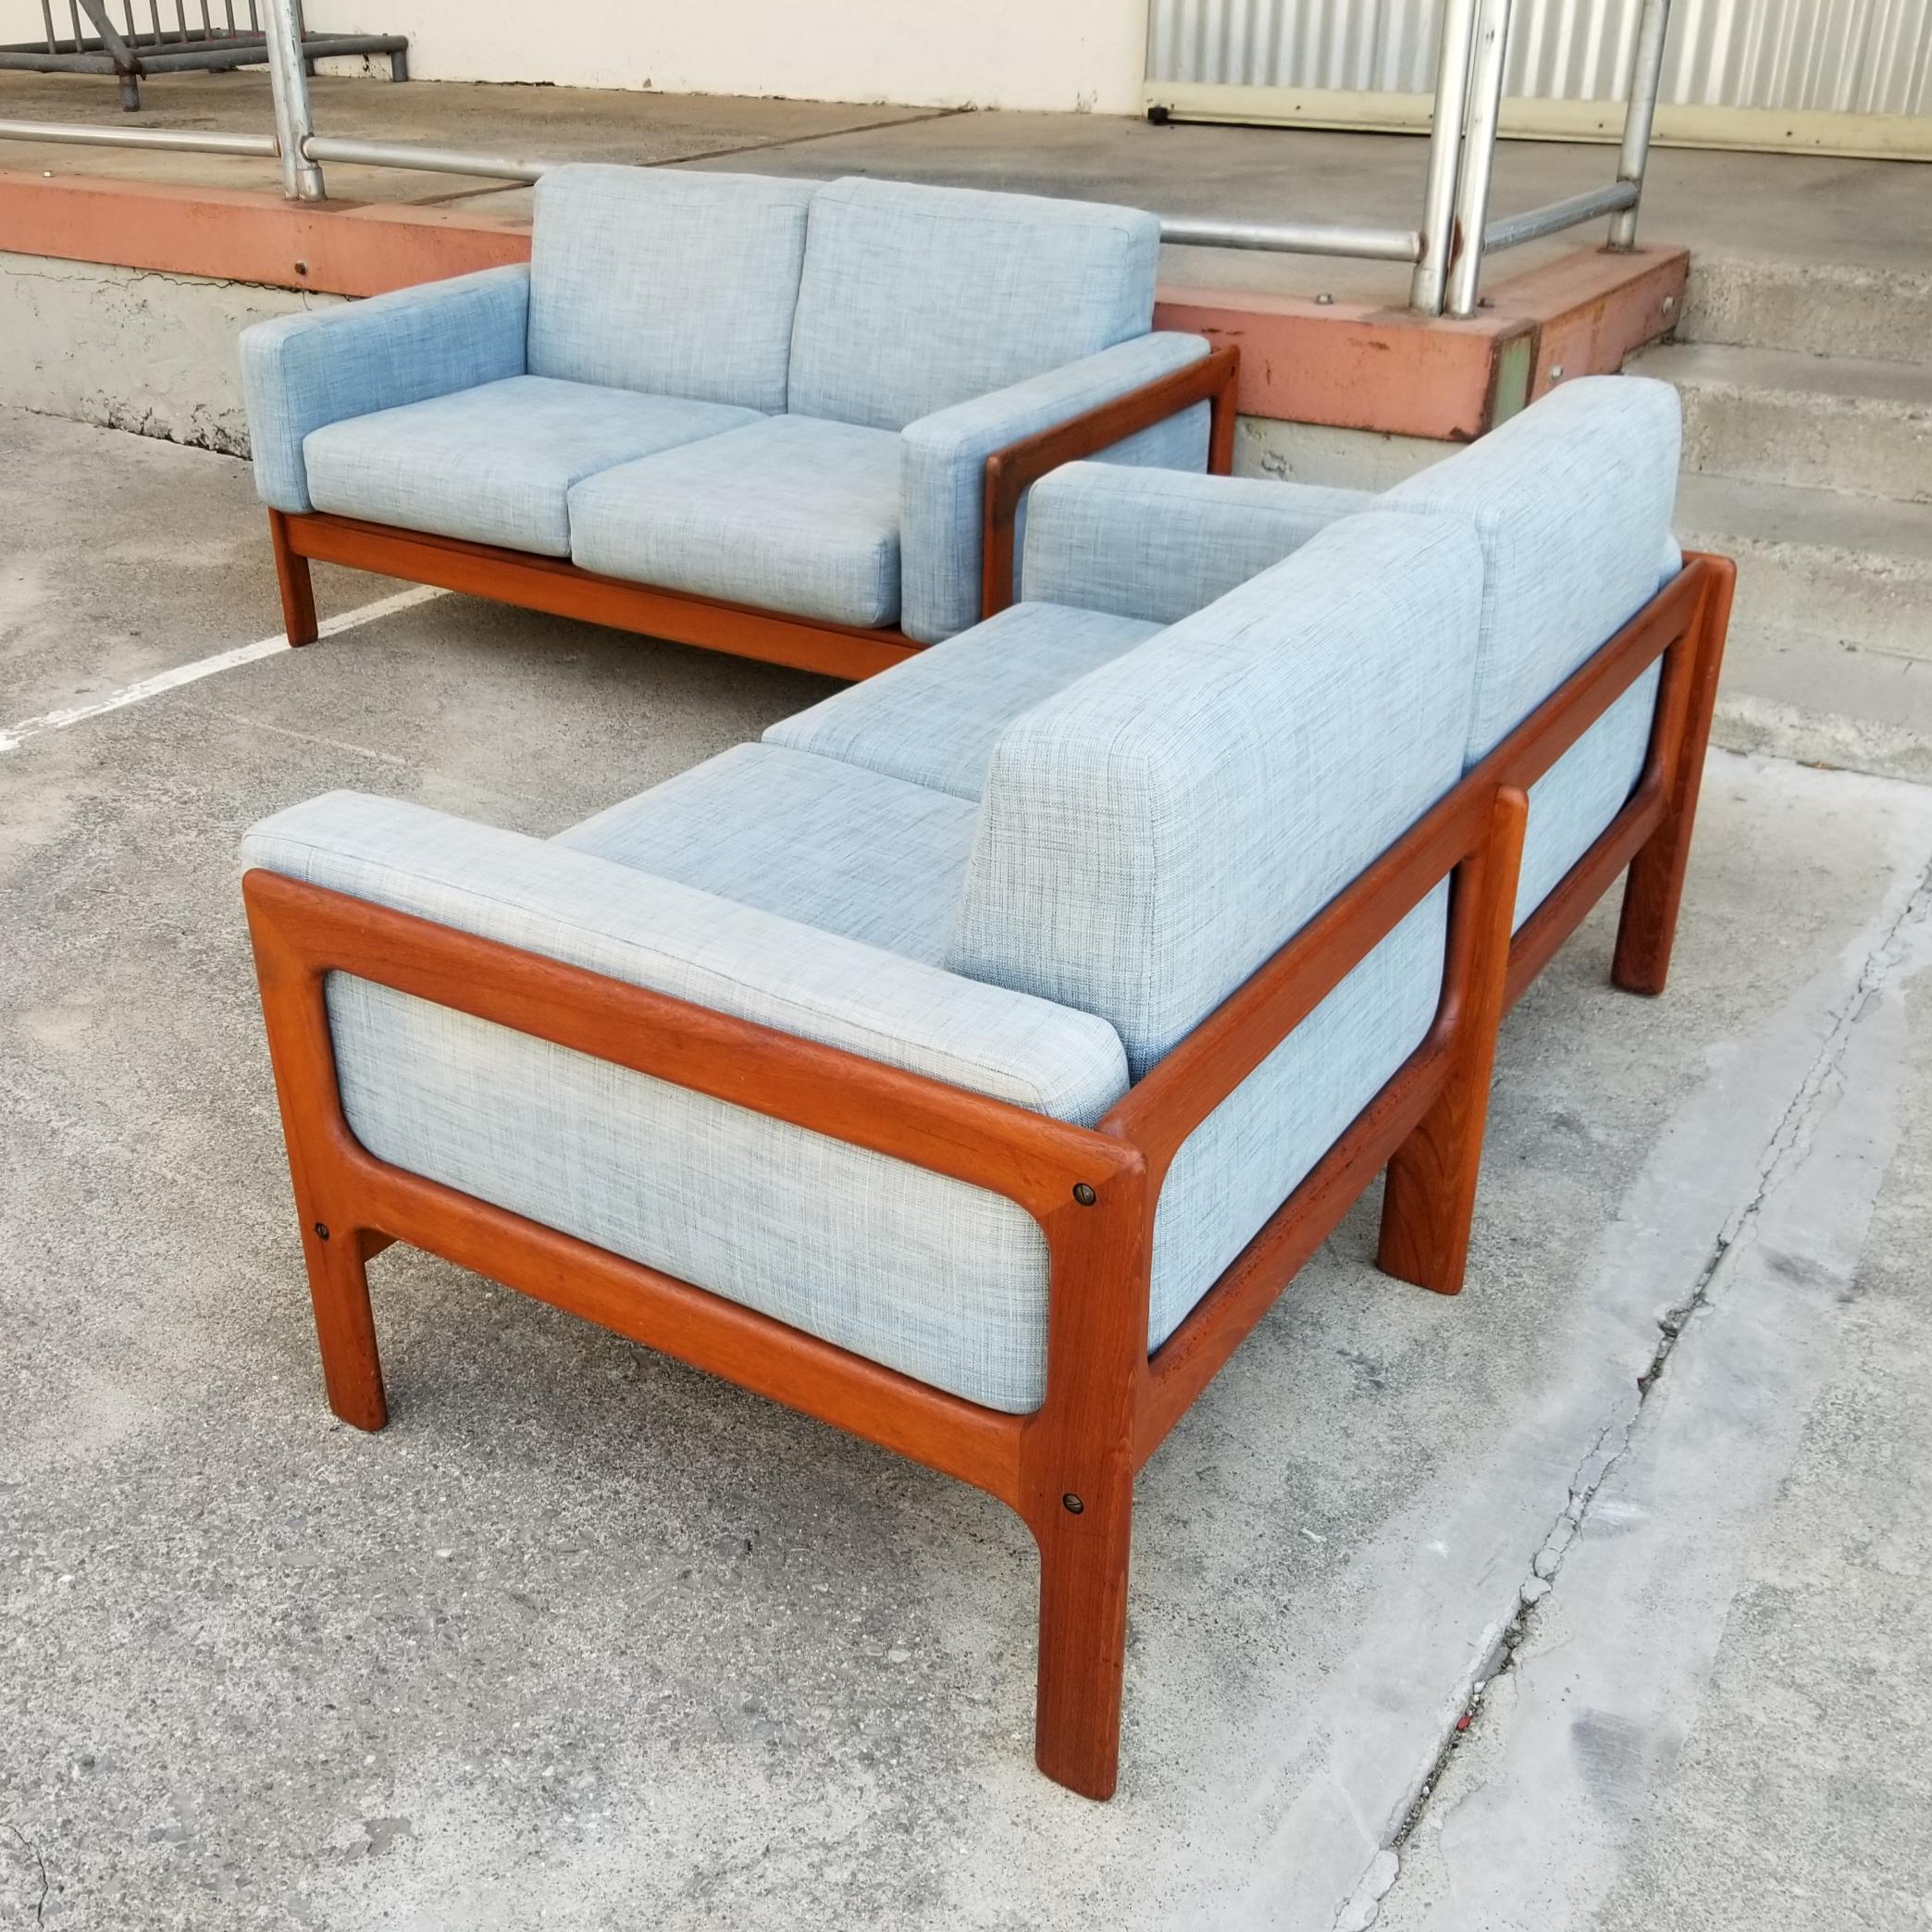 A matched pair of solid teak Danish Modern loveseats / two seat sofas. Very good original finish with older re-upholstery. Structurally very solid. Beautiful glow and patina to finish. Retaining Danish Control label. Similar to the open rectangular